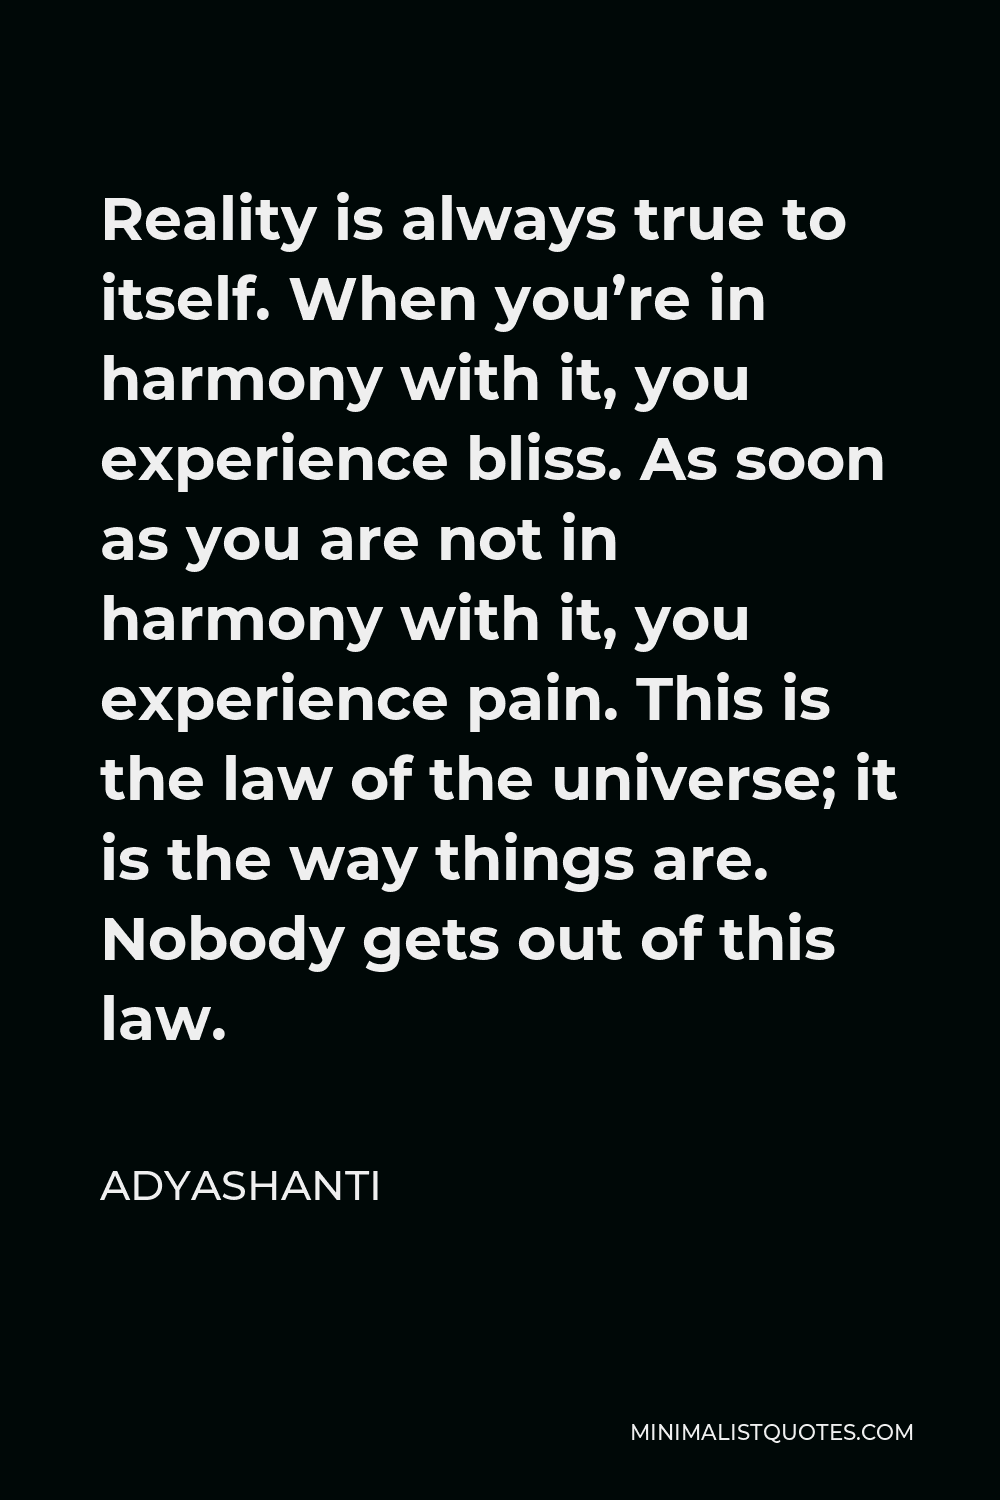 Adyashanti Quote - Reality is always true to itself. When you’re in harmony with it, you experience bliss. As soon as you are not in harmony with it, you experience pain. This is the law of the universe; it is the way things are. Nobody gets out of this law.